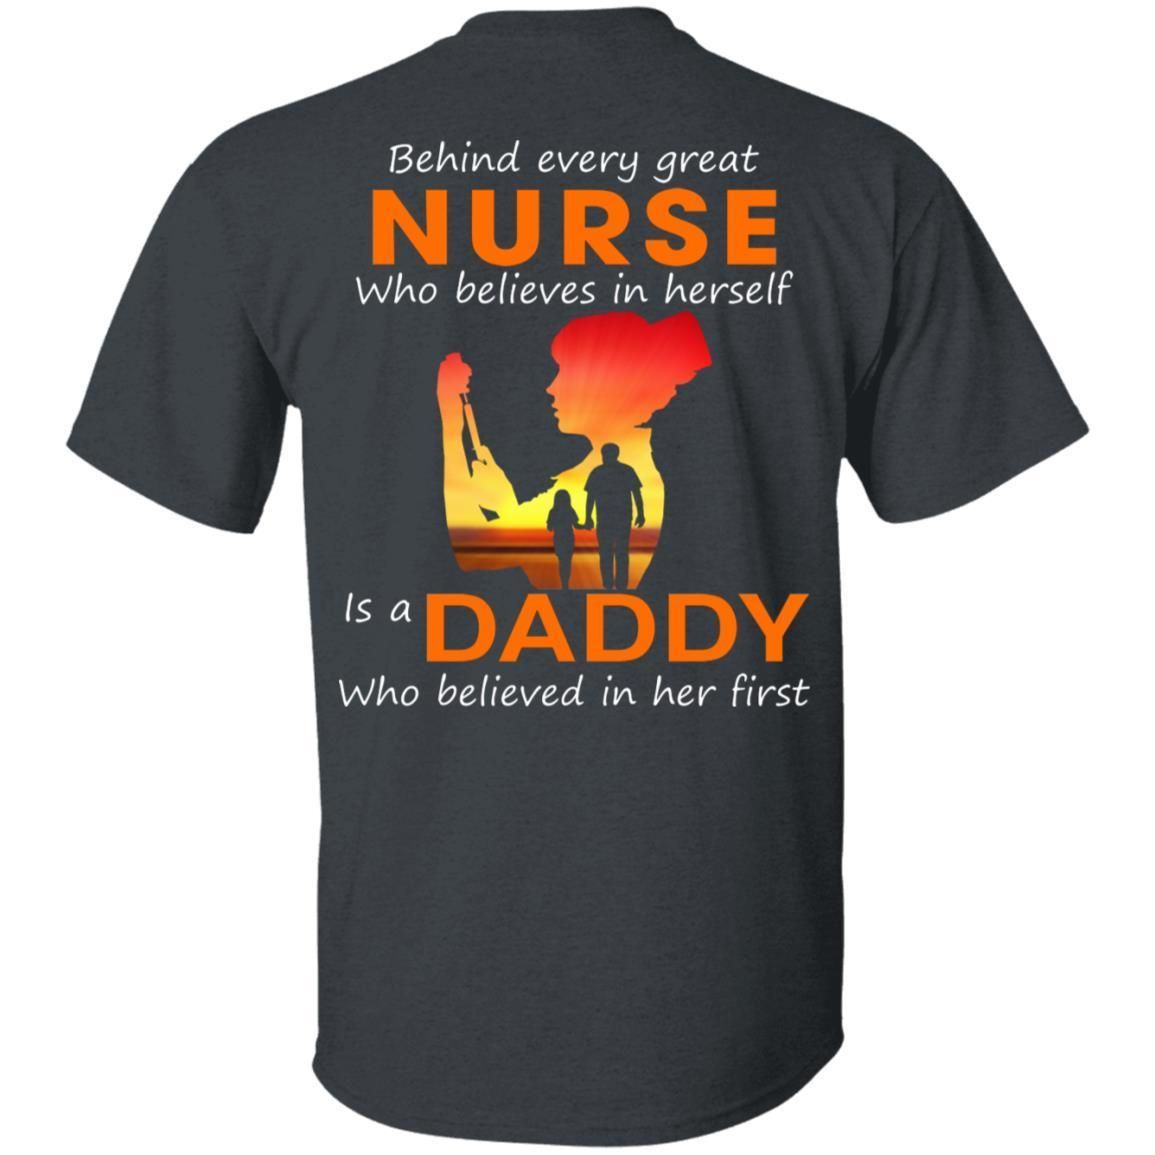 Behind Every Great Nurse who believes in herself is a Daddy shirts back side